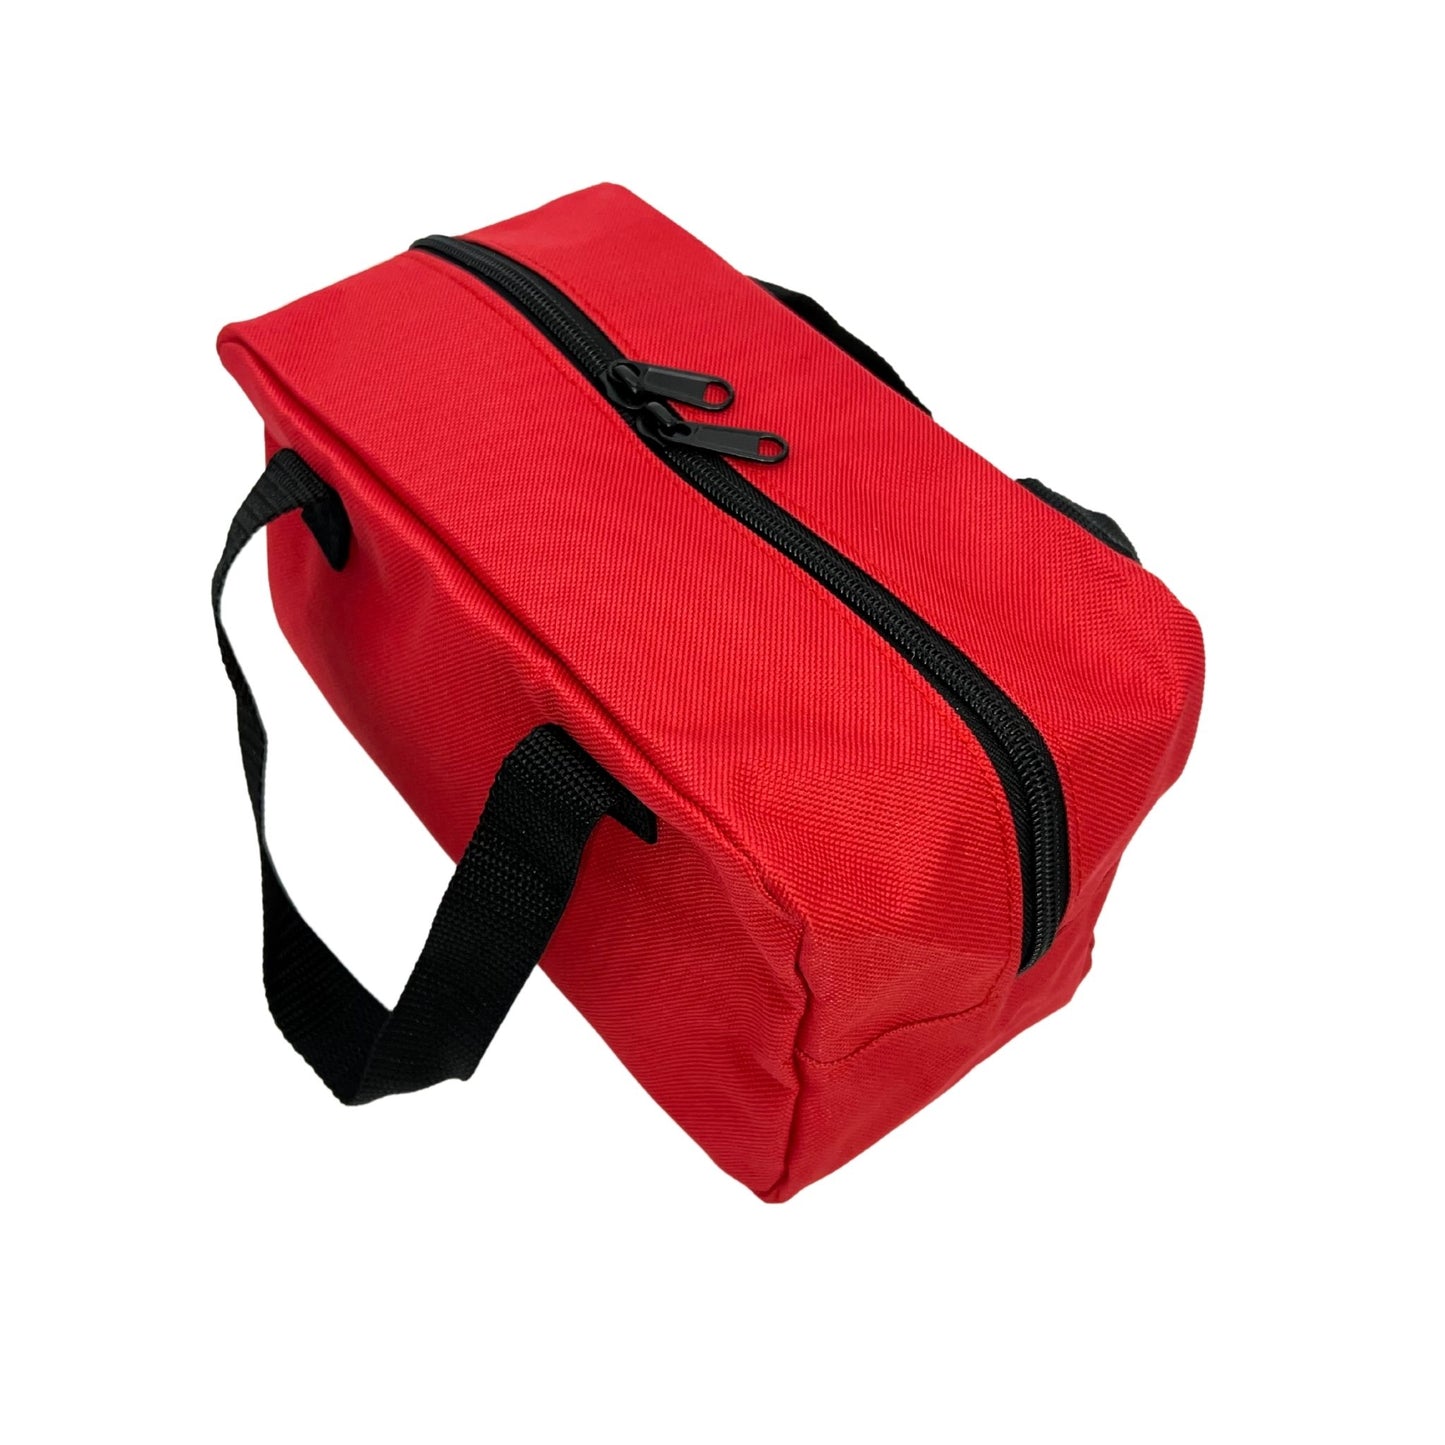 lockout bag for loto devices